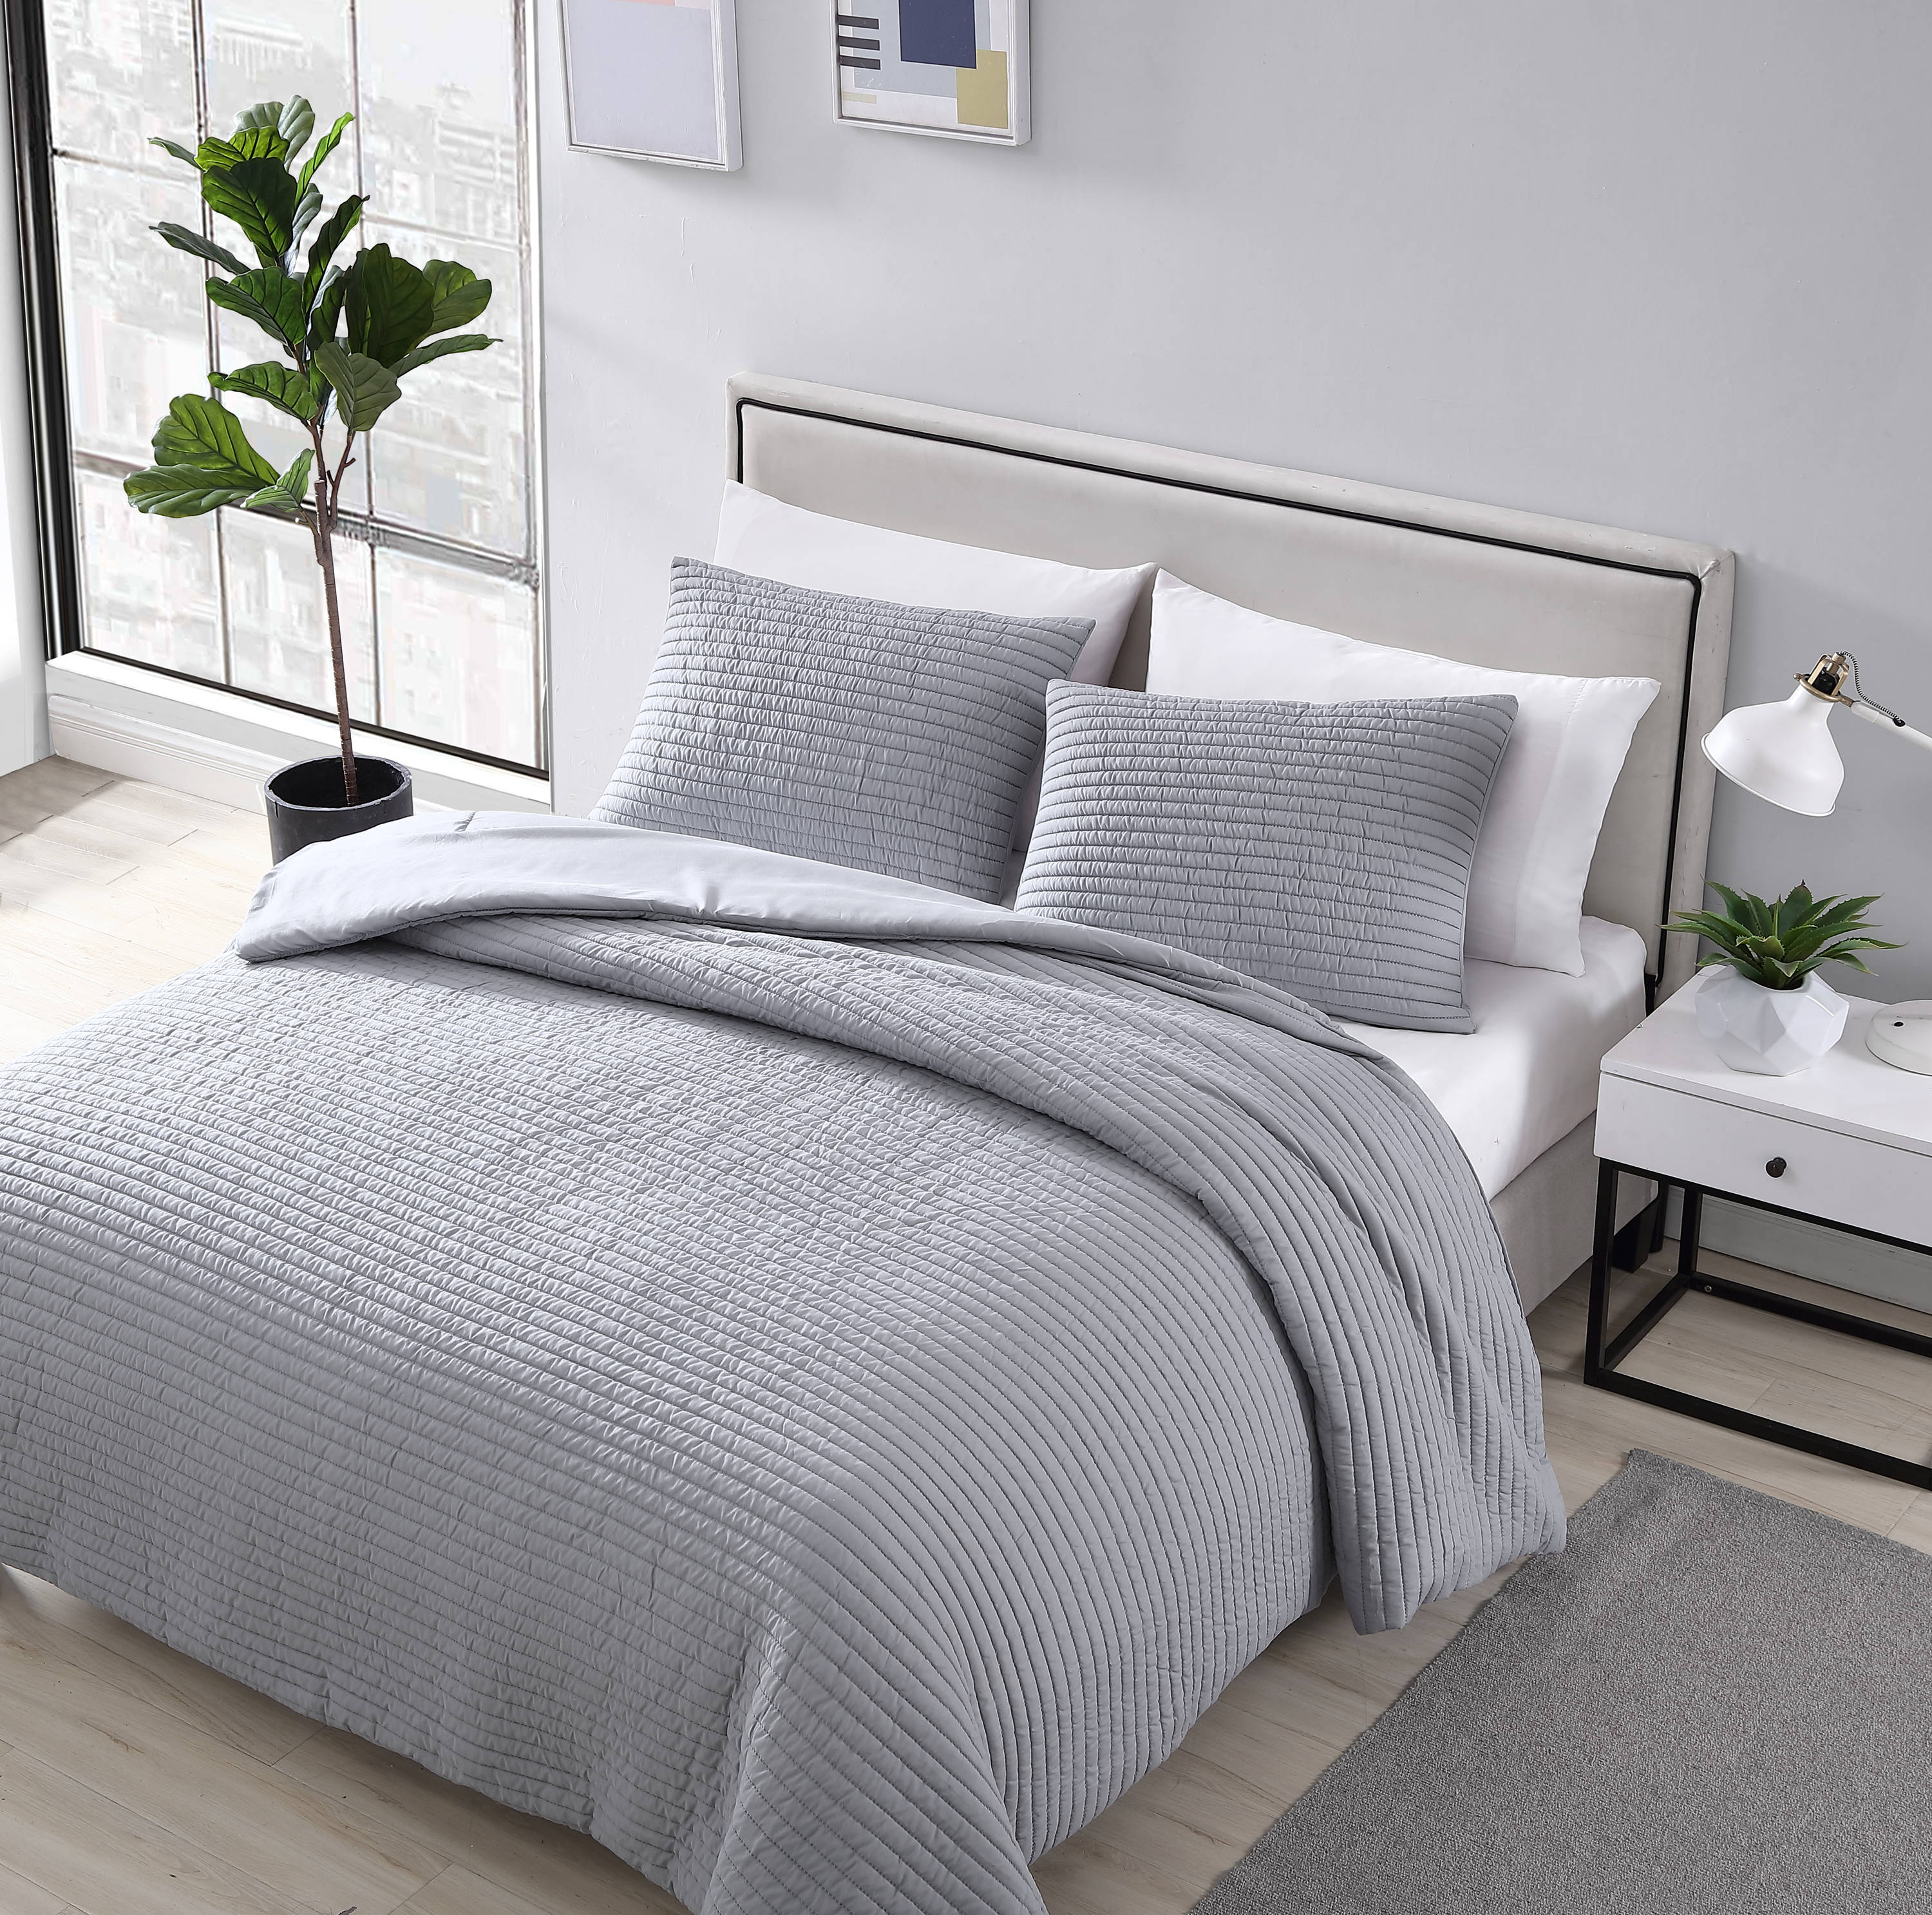 The Nesting Company Navy and Gray Solid Reversible Queen Comforter